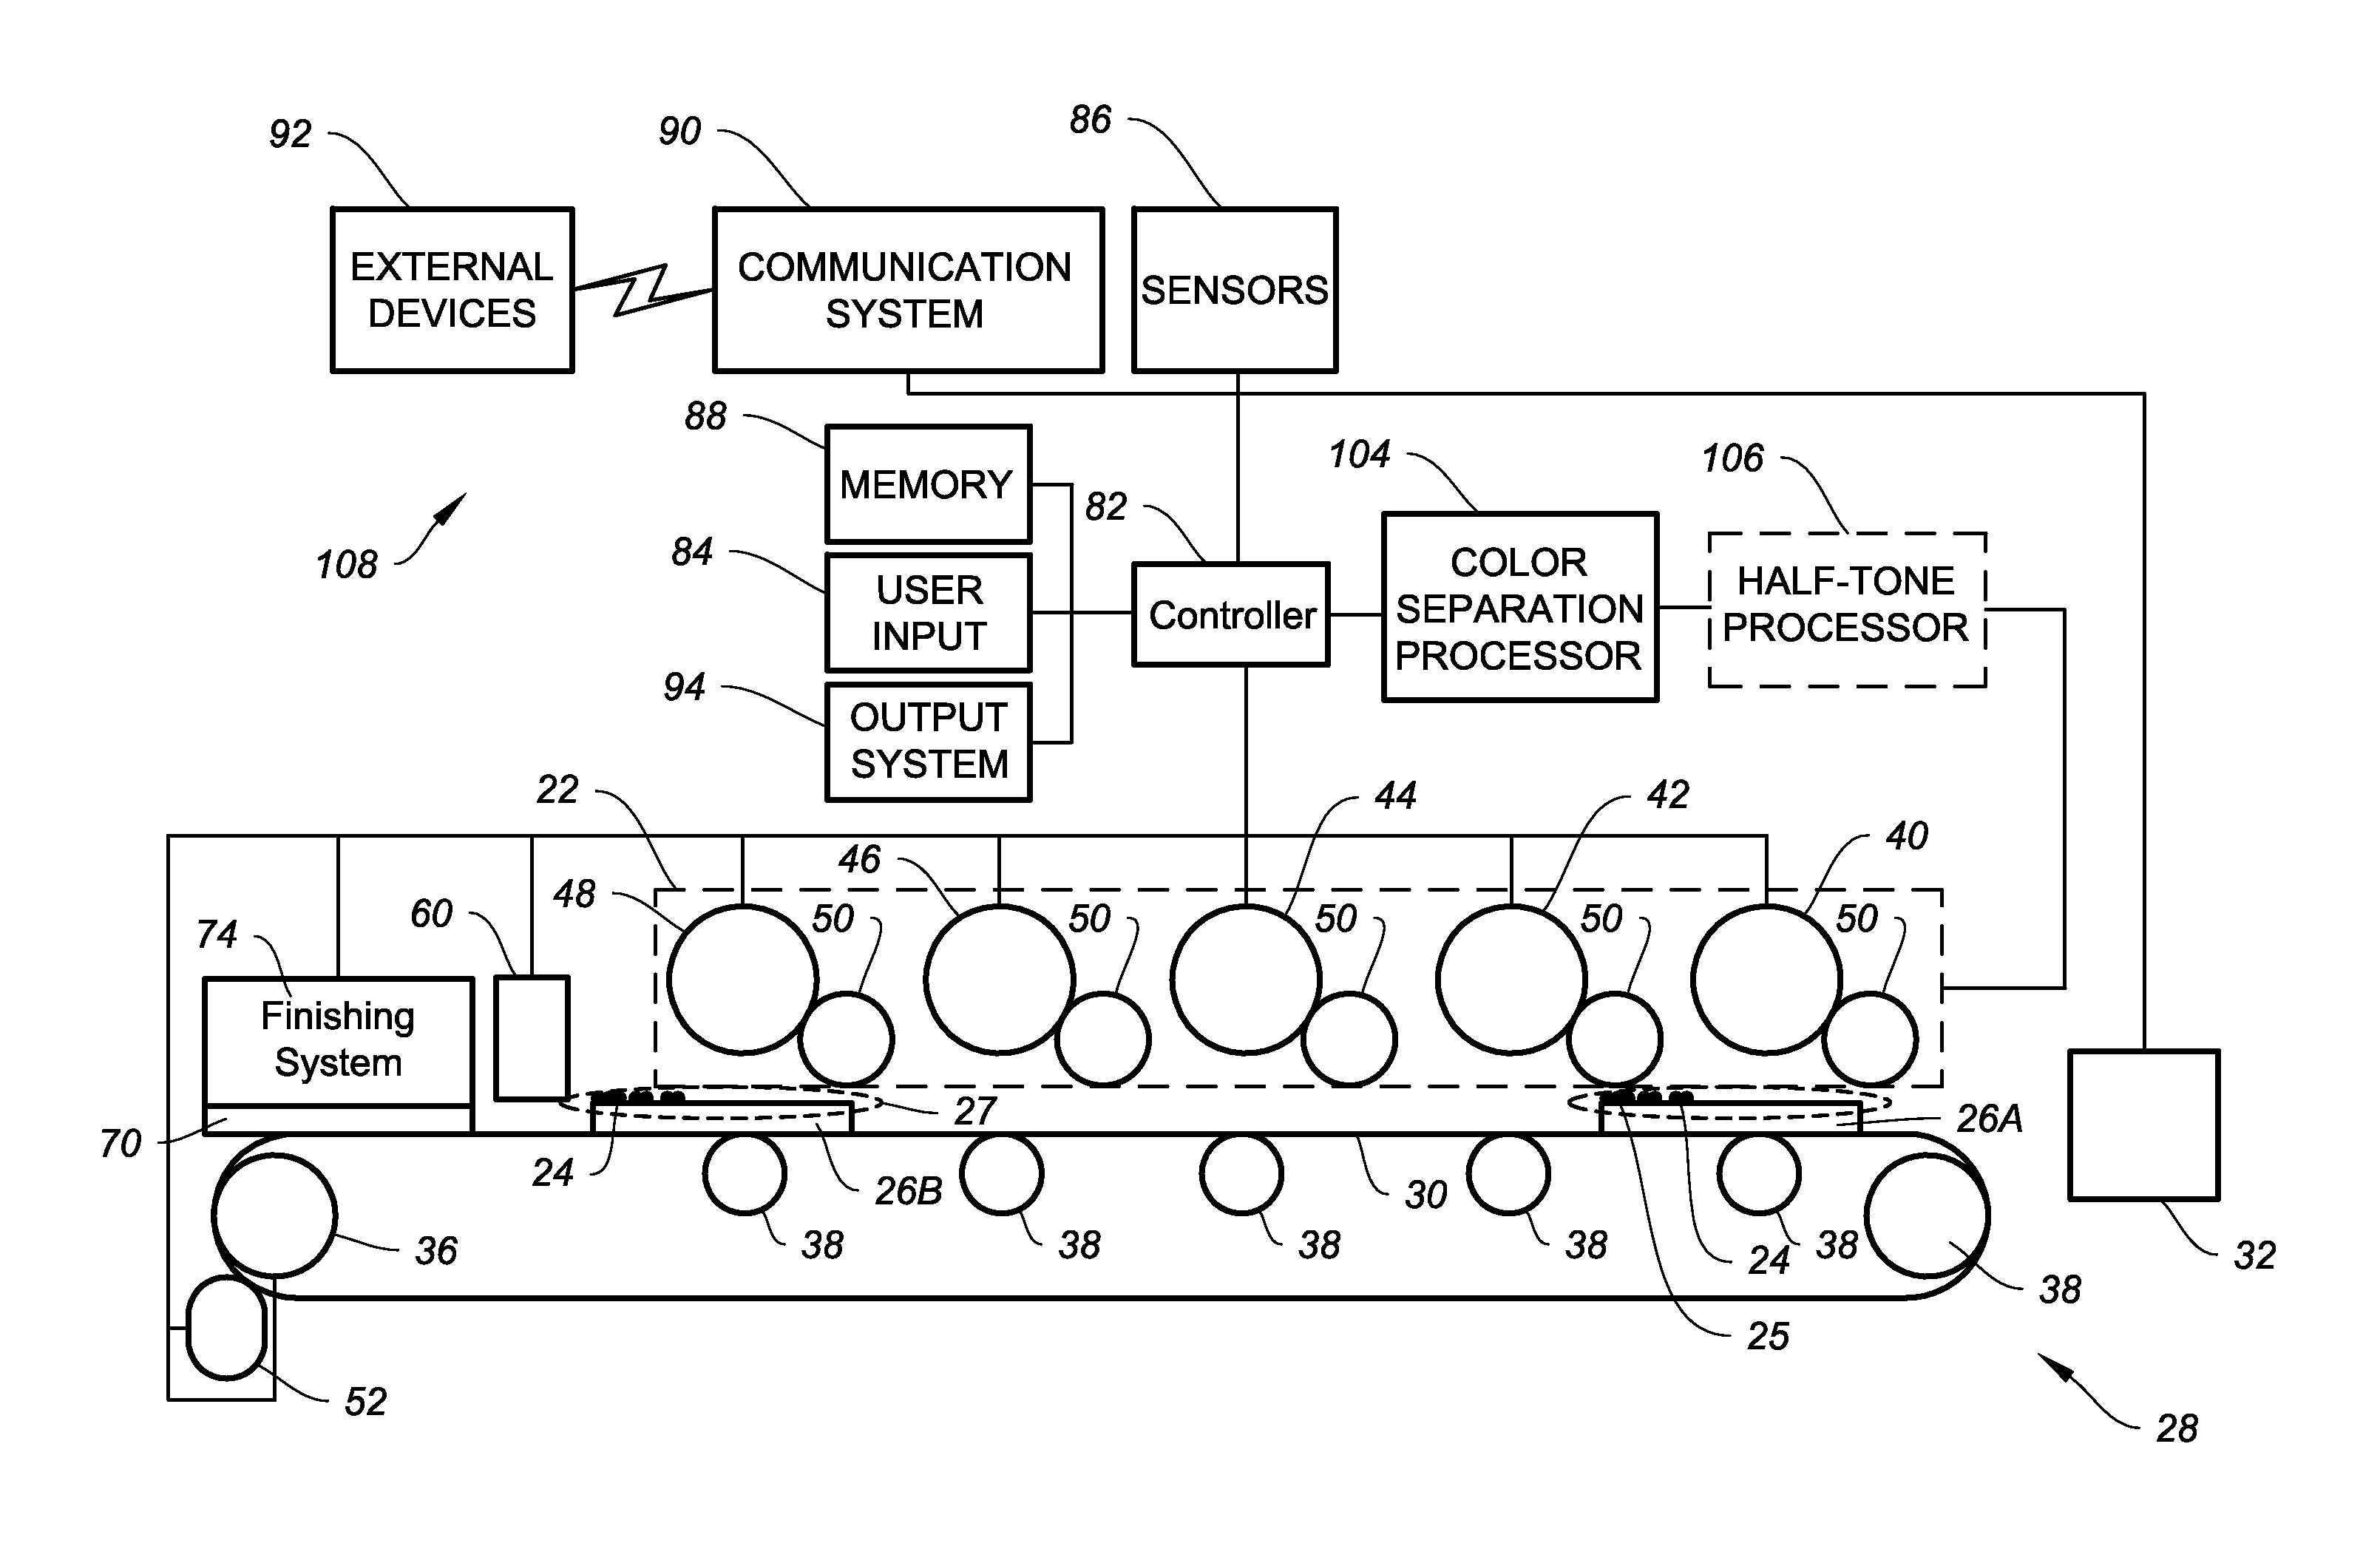 Balancing discharge area developed and transferred toner